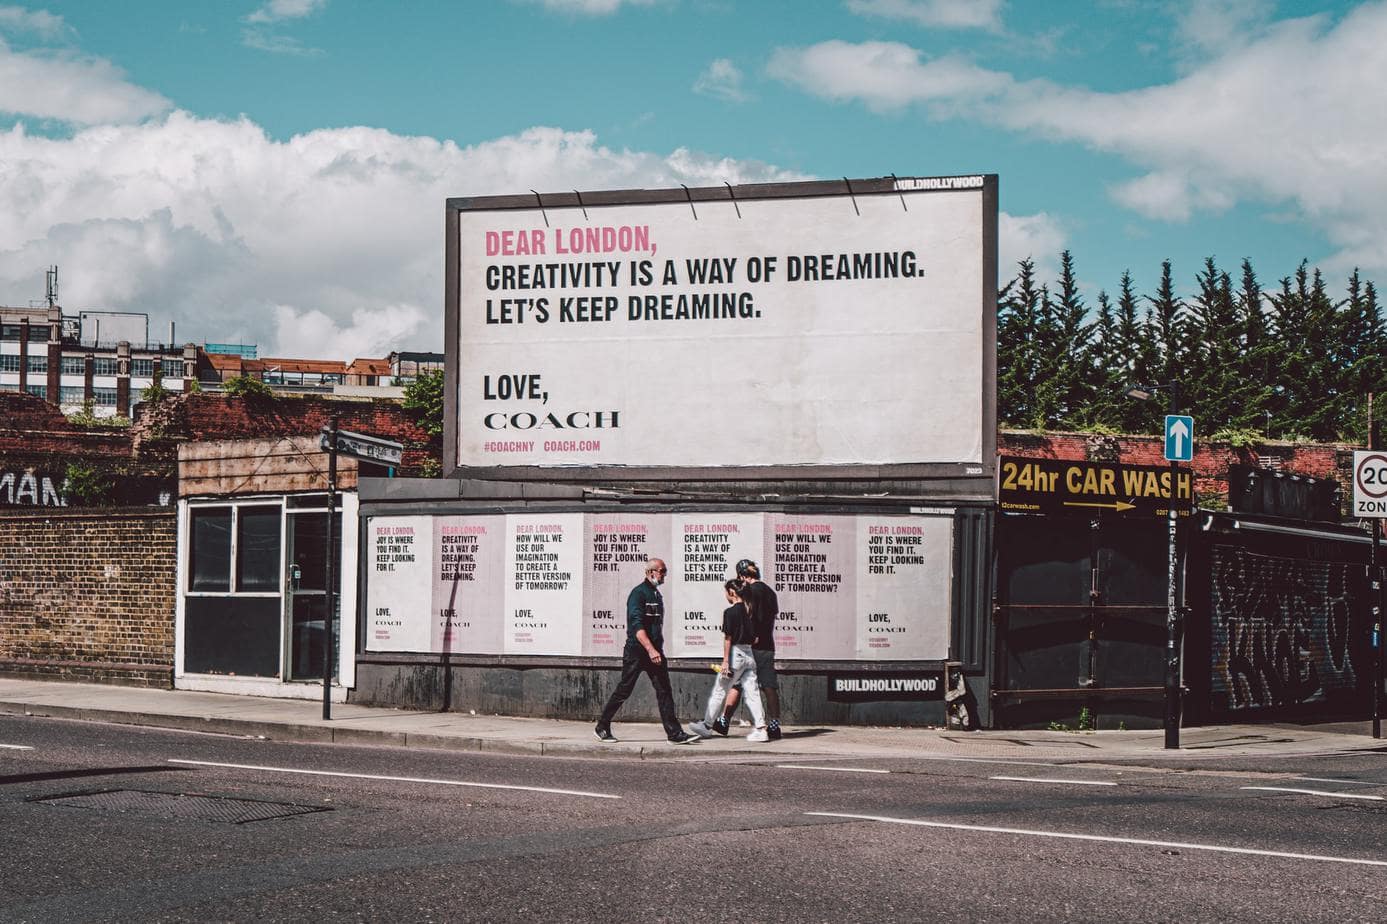 Does outdoor advertising make sense in the age of the internet?